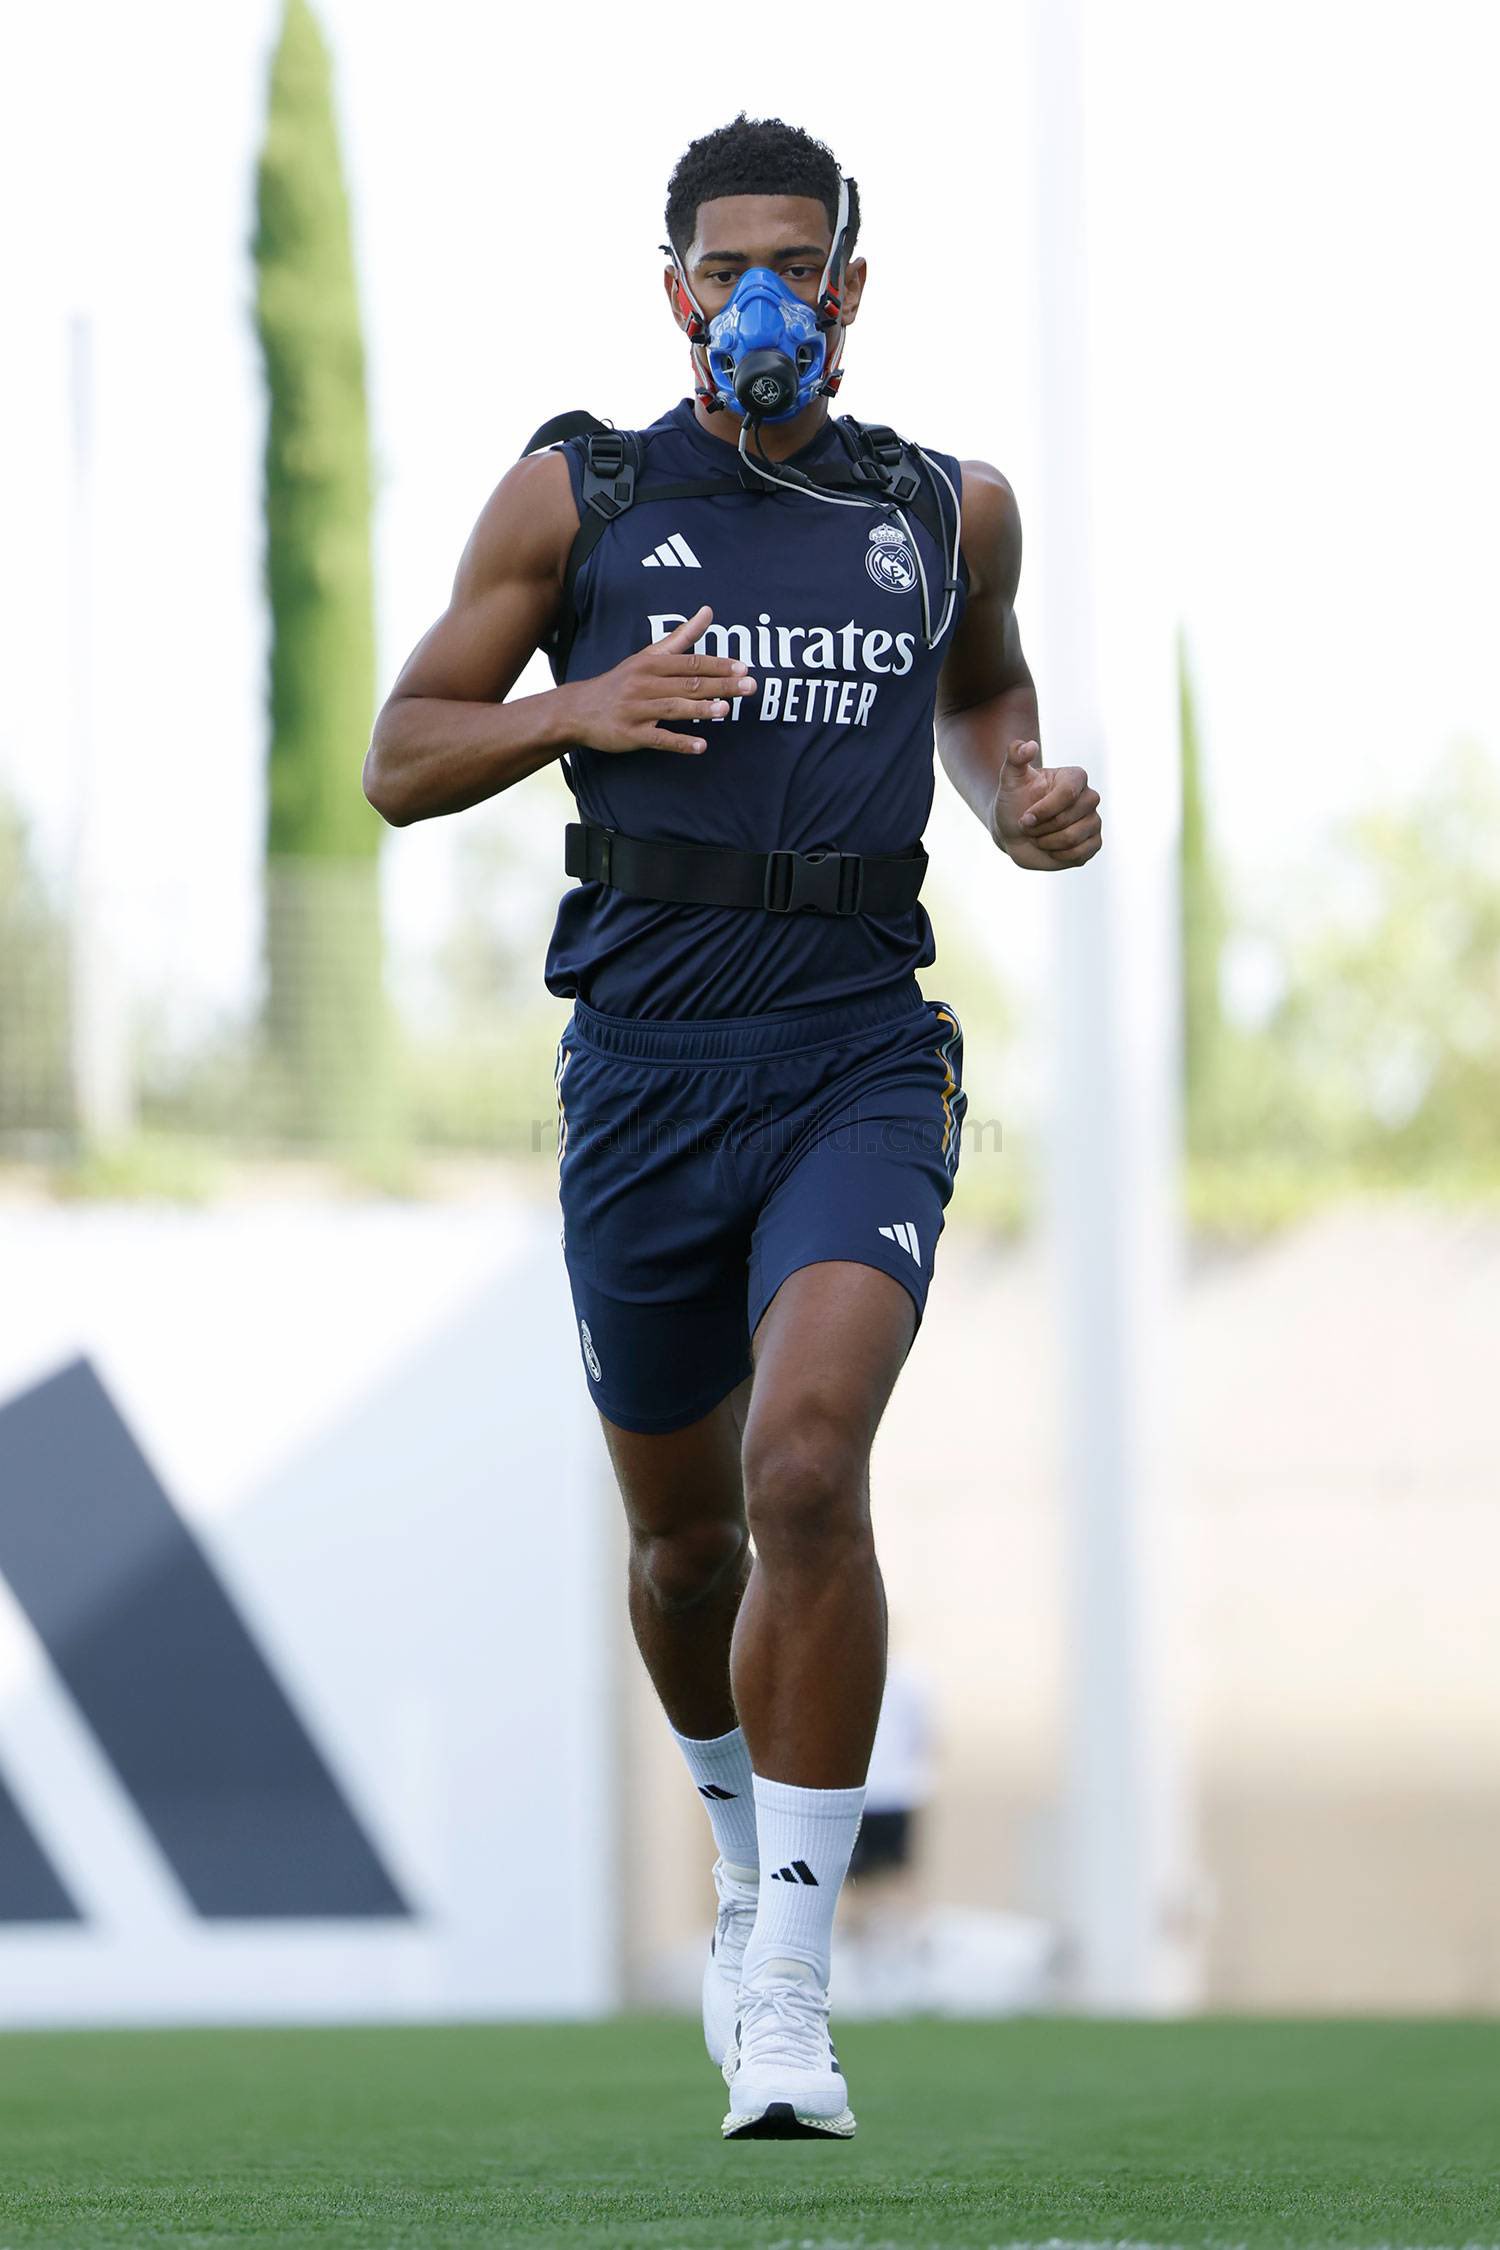 Real Madrid Players Take on Intense Training Session with 'Bane'-Style Masks Under Watchful Eye of Fitness Coach Antonio Pintus 🔥🏃‍♂️💪